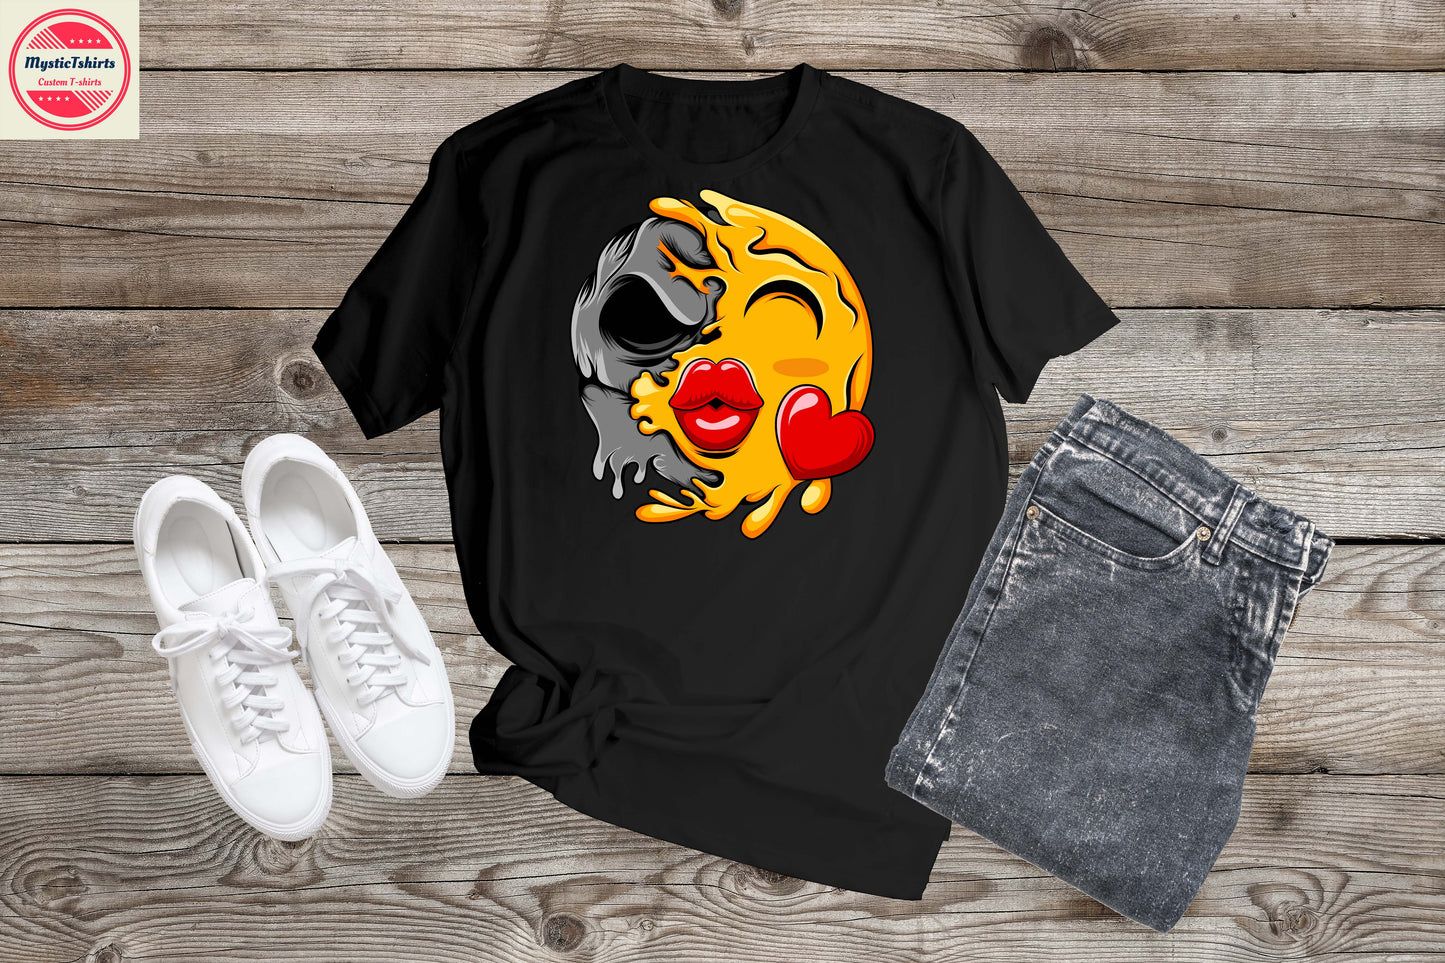 090. CRAZY FACE, Personalized T-Shirt, Custom Text, Make Your Own Shirt, Custom Tee